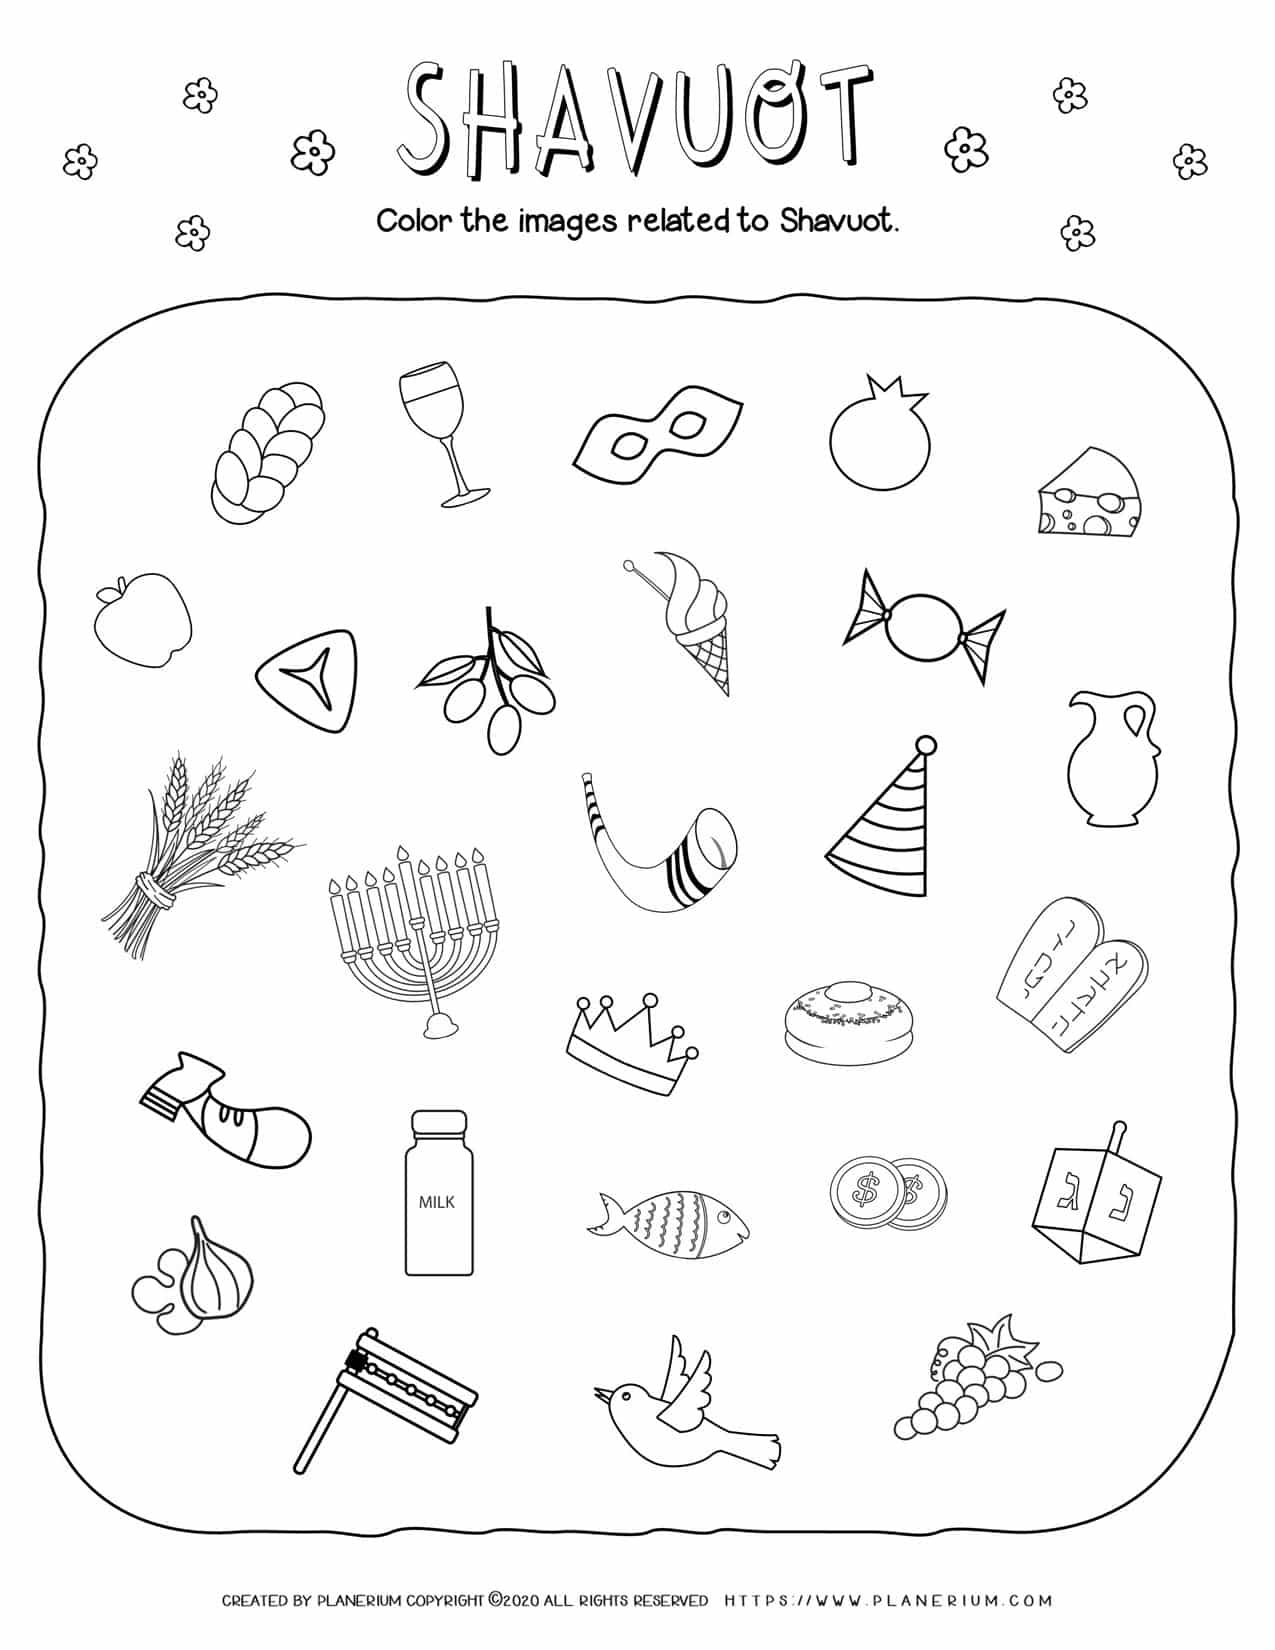 Shavuot Worksheet - Related Images | Planerium